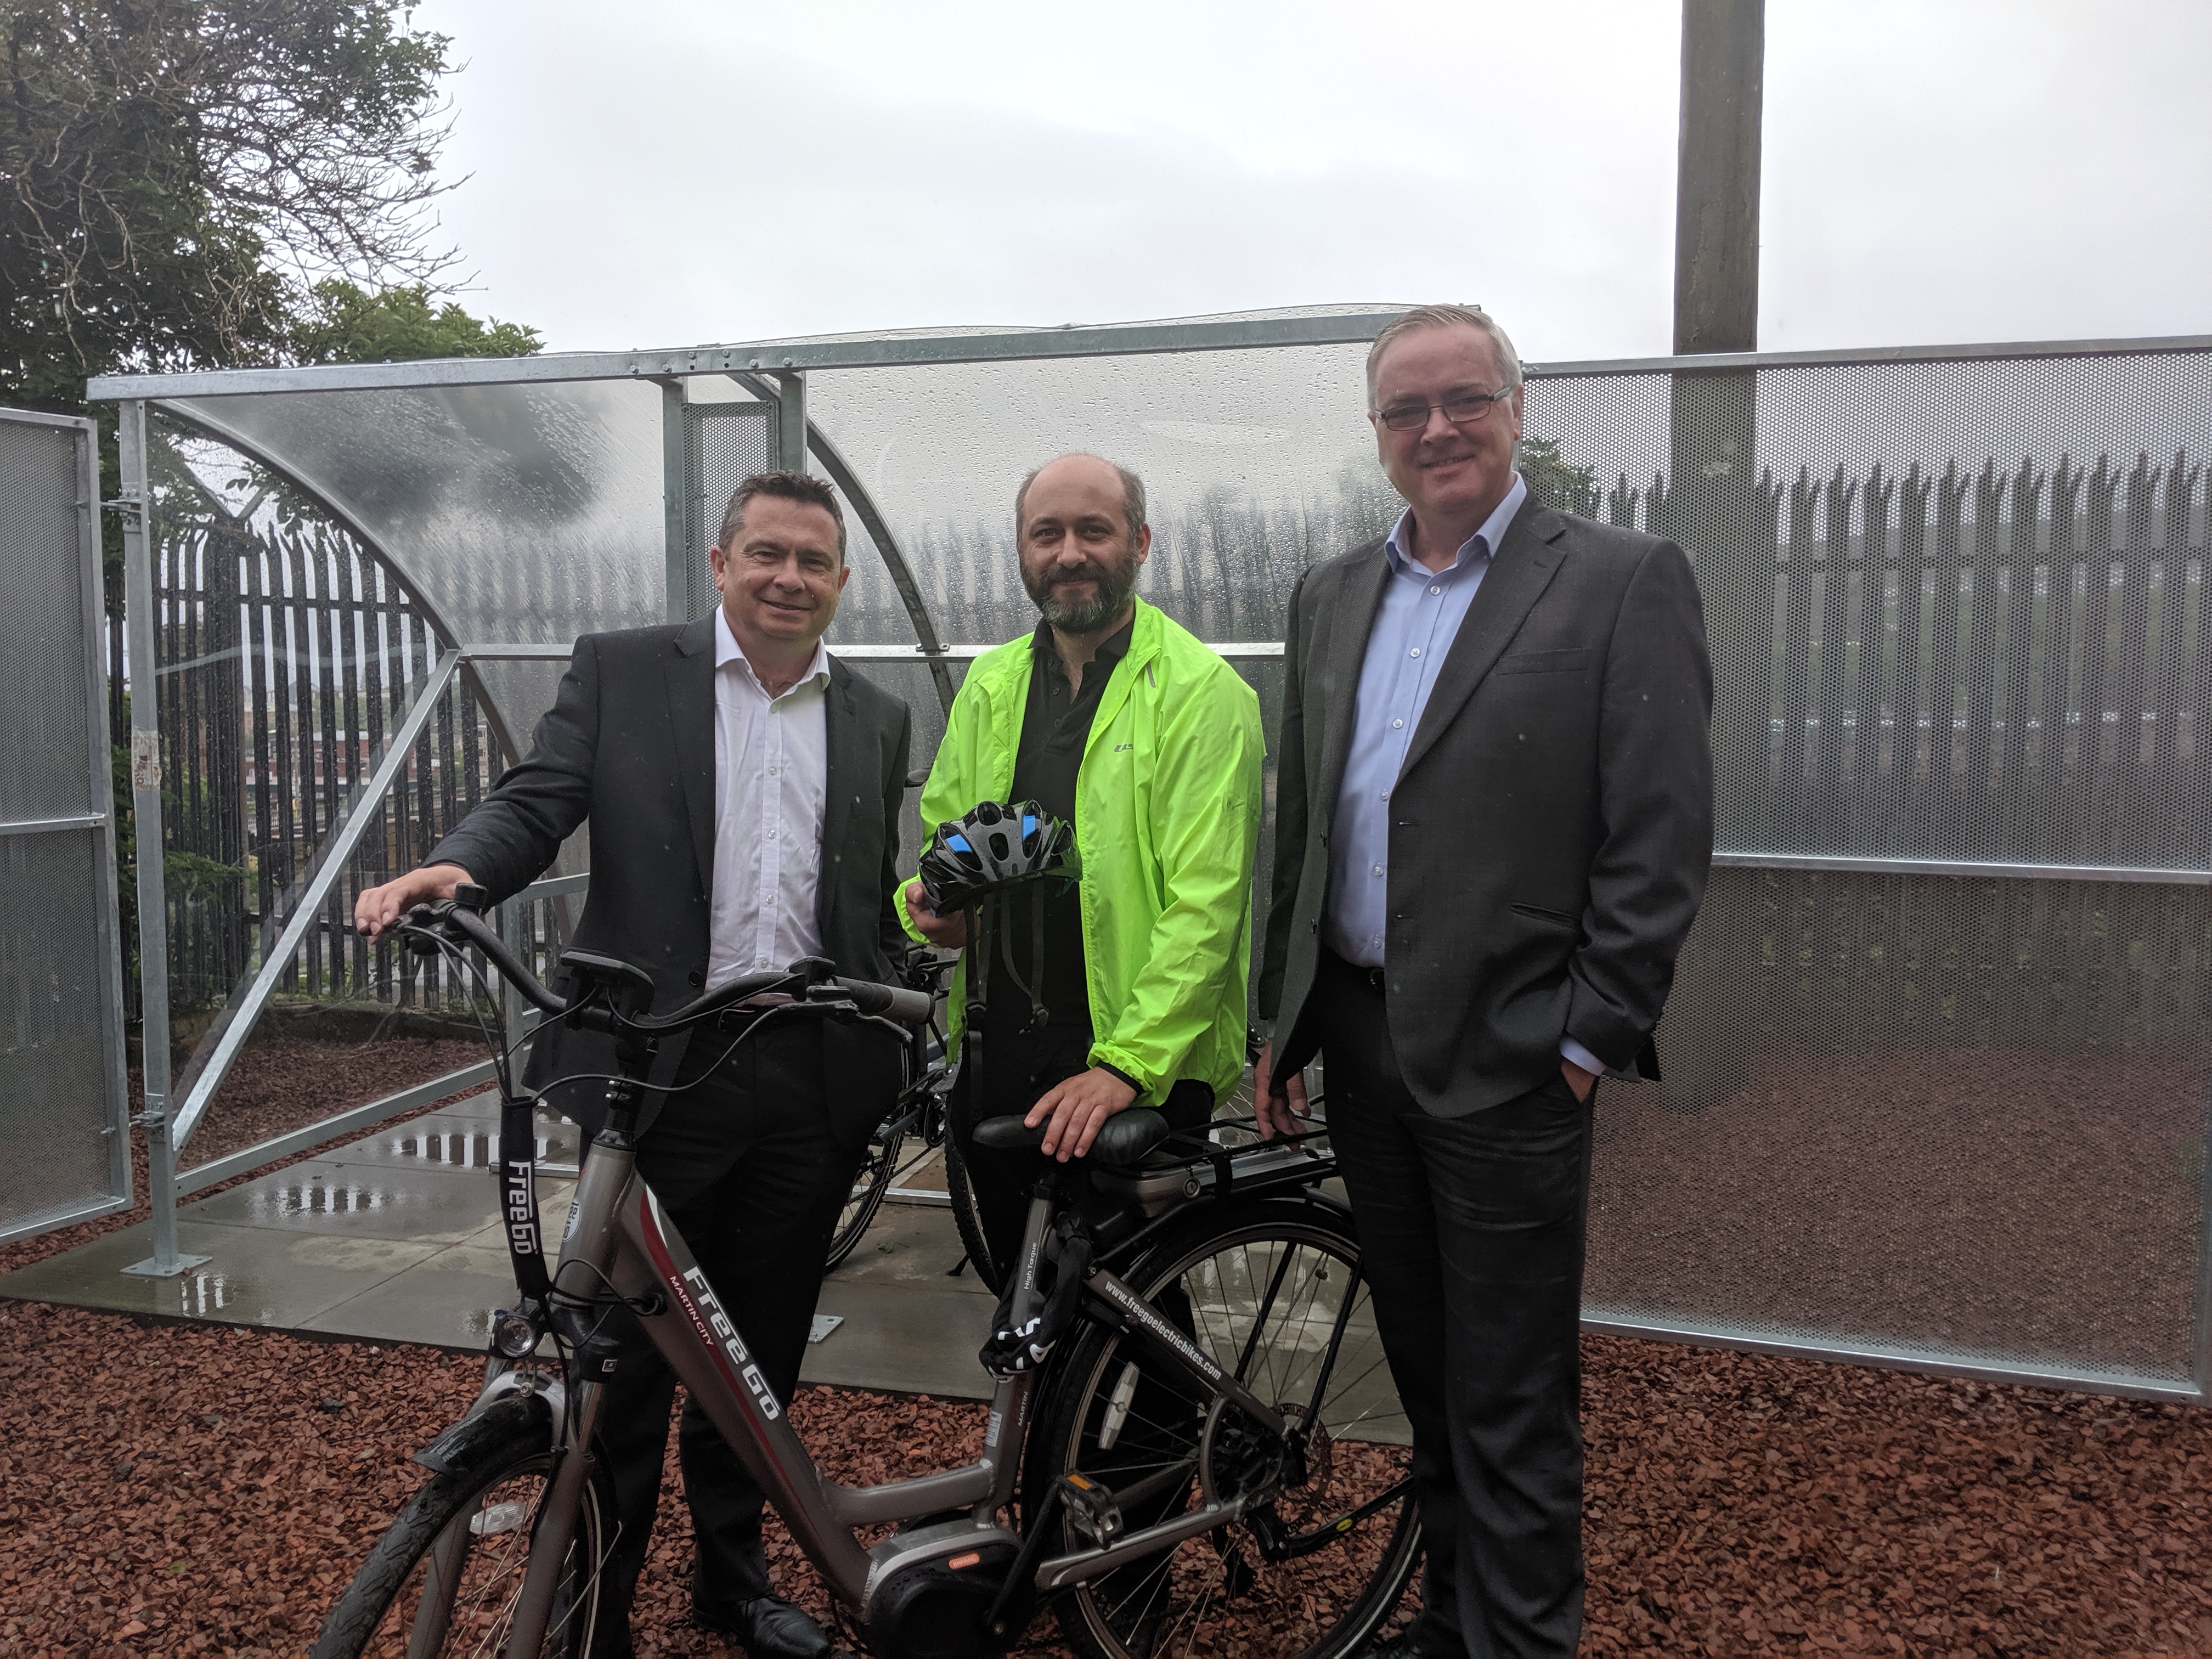 eBike Sharing Scheme launches in Inverclyde with Cloch support